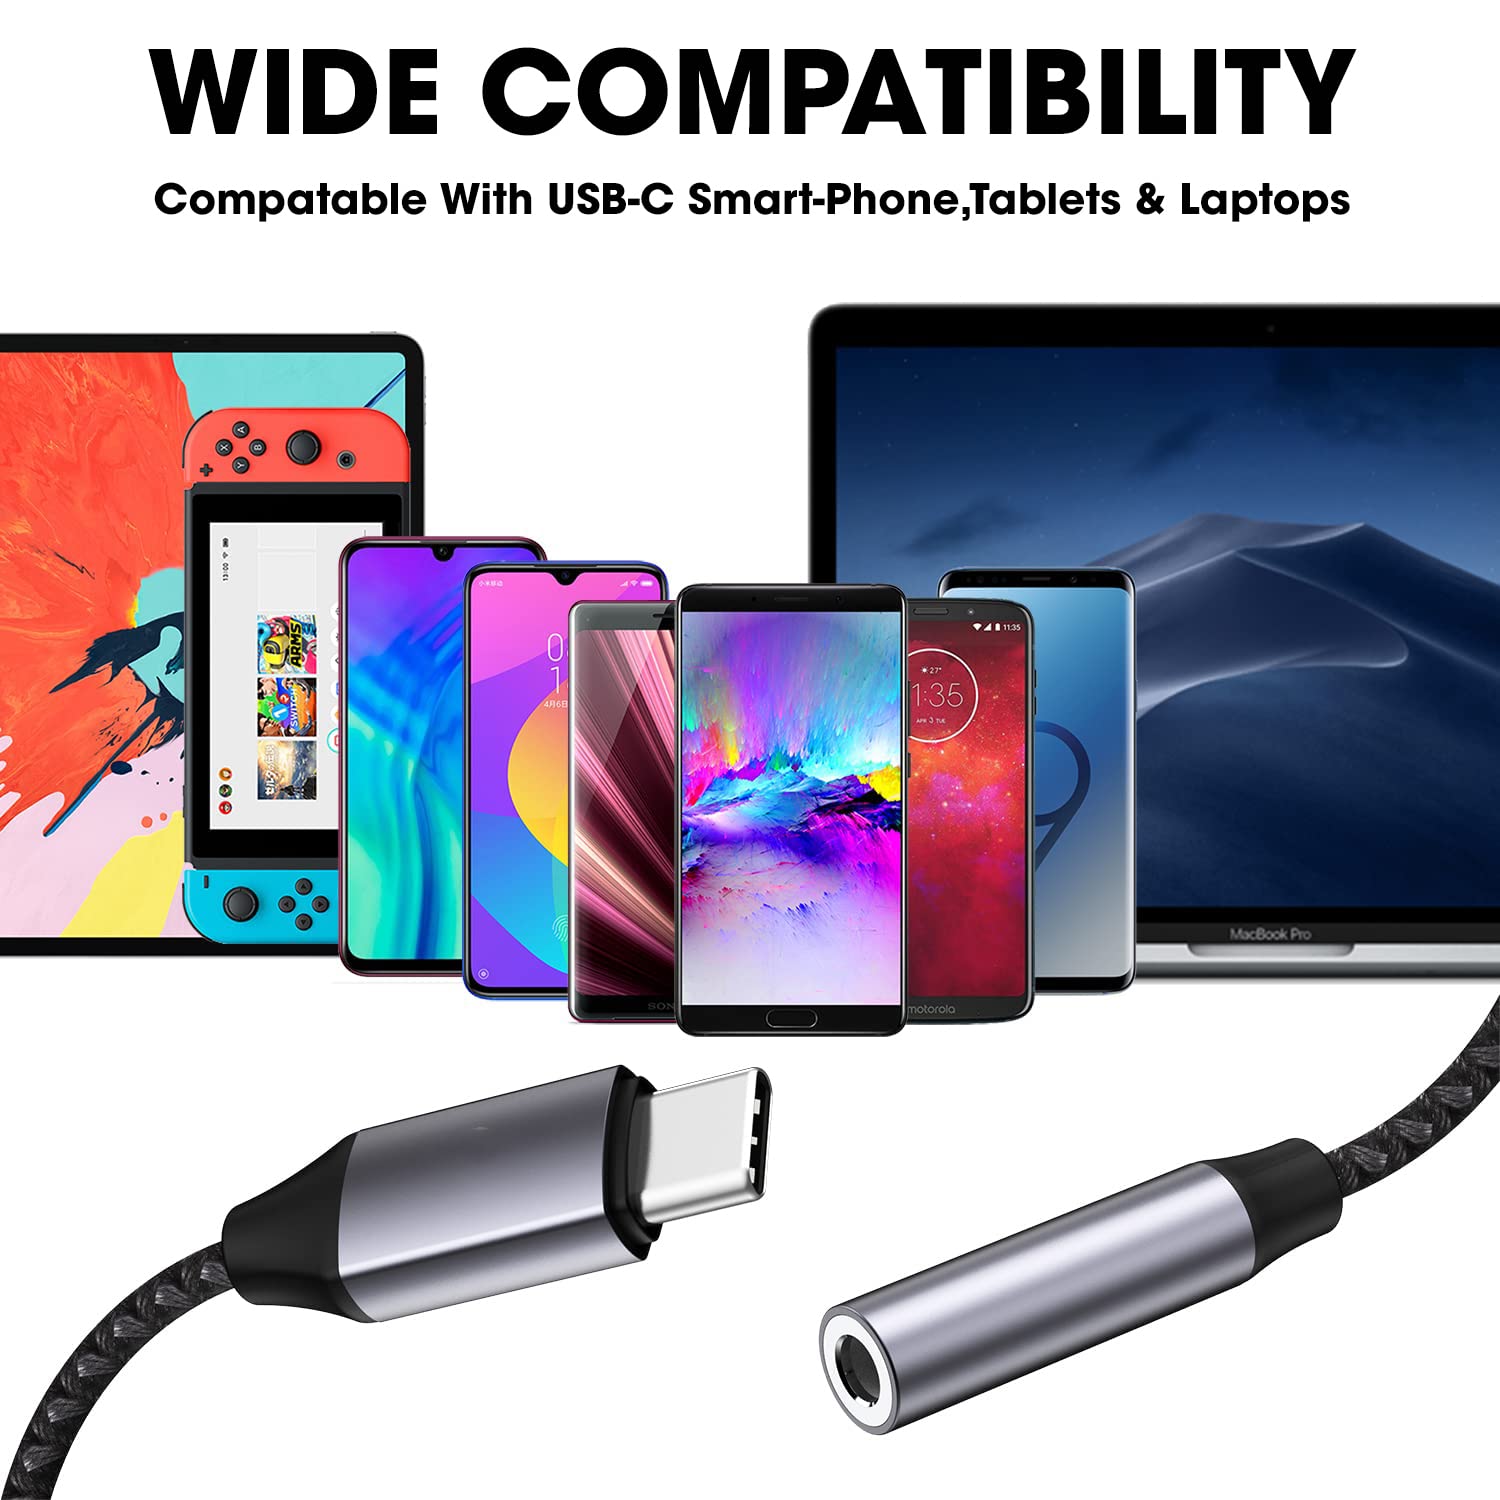 USB C Headphone Adapter for Samsung Galaxy Note 10/10+, Fold, Tab S6, Type C